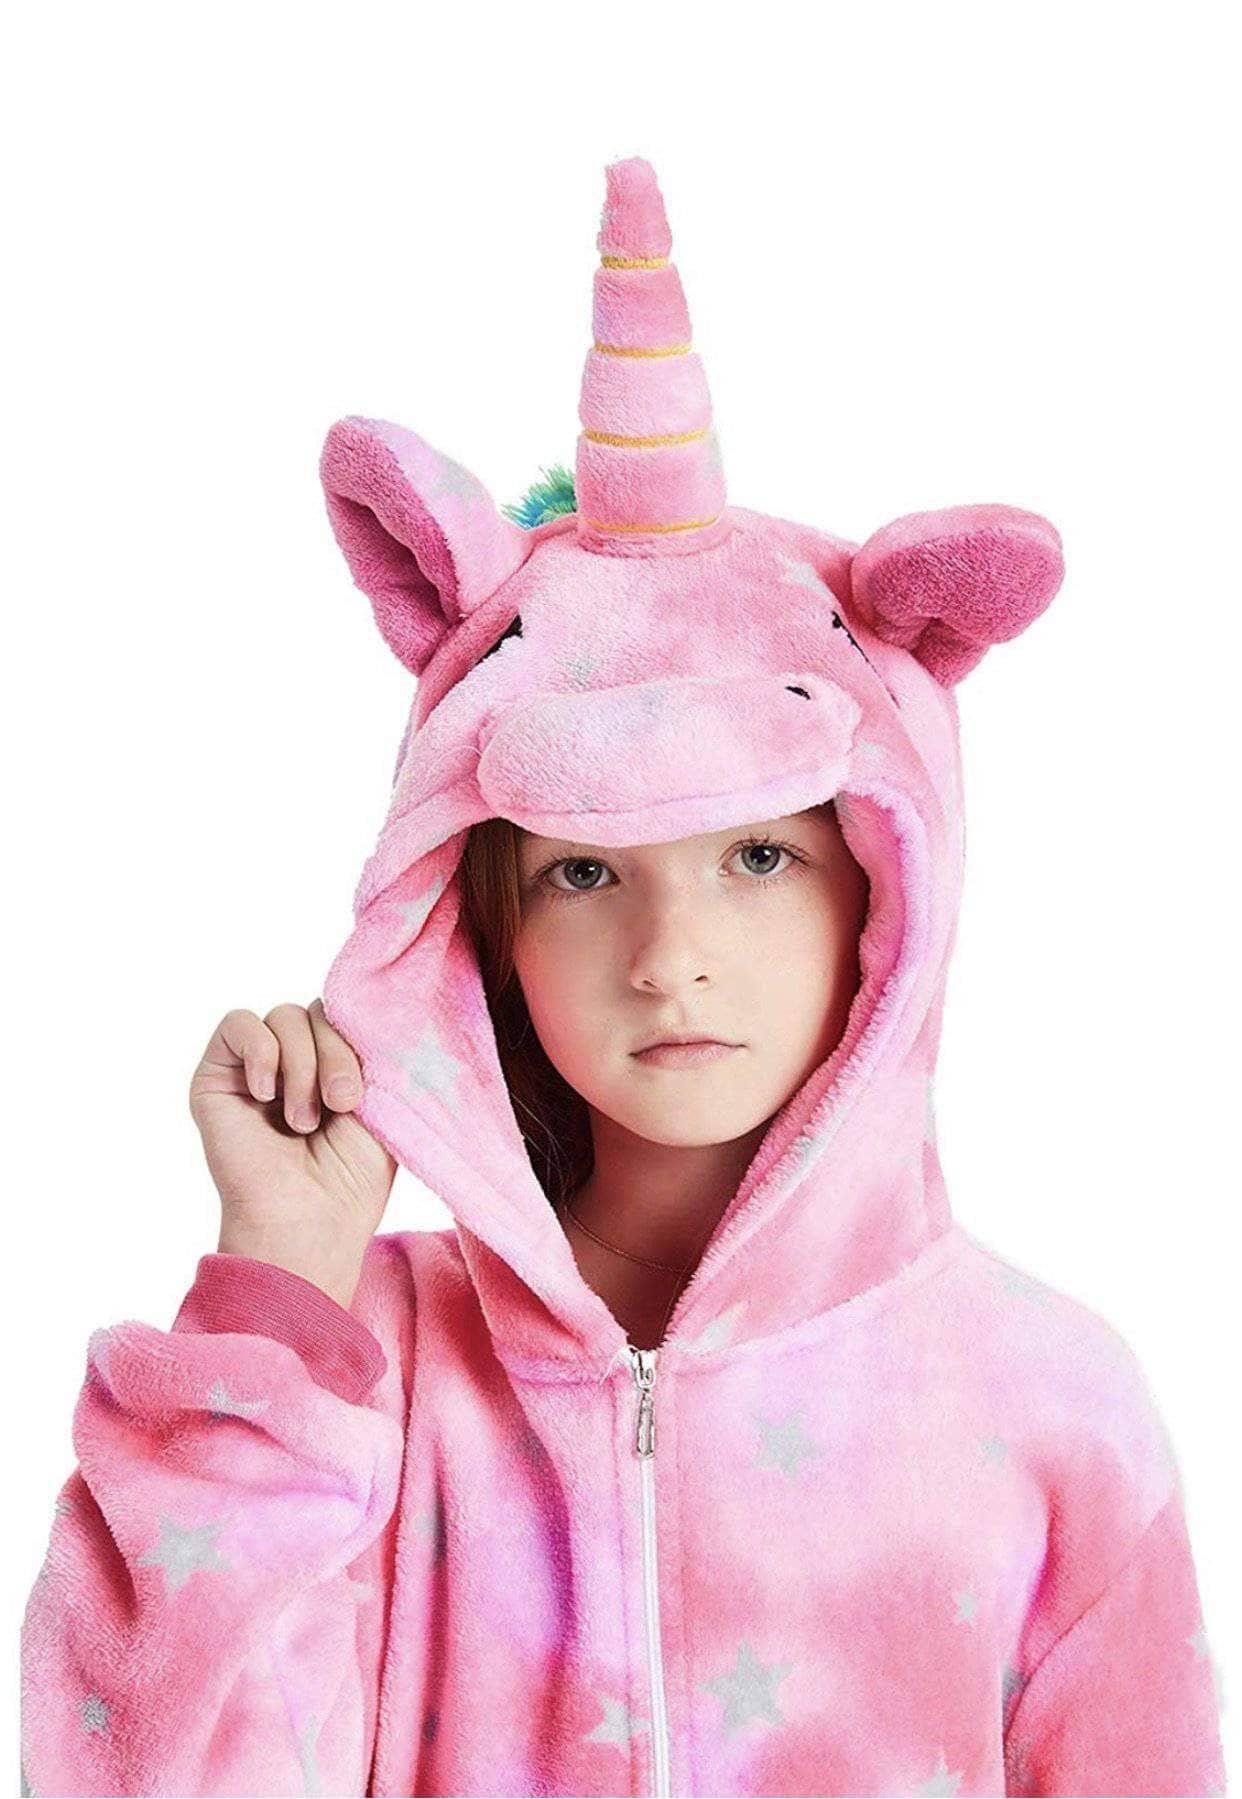  Fun Costumes - Women's Magical Unicorn Costume Adult Onesie  Hooded Large : Clothing, Shoes & Jewelry